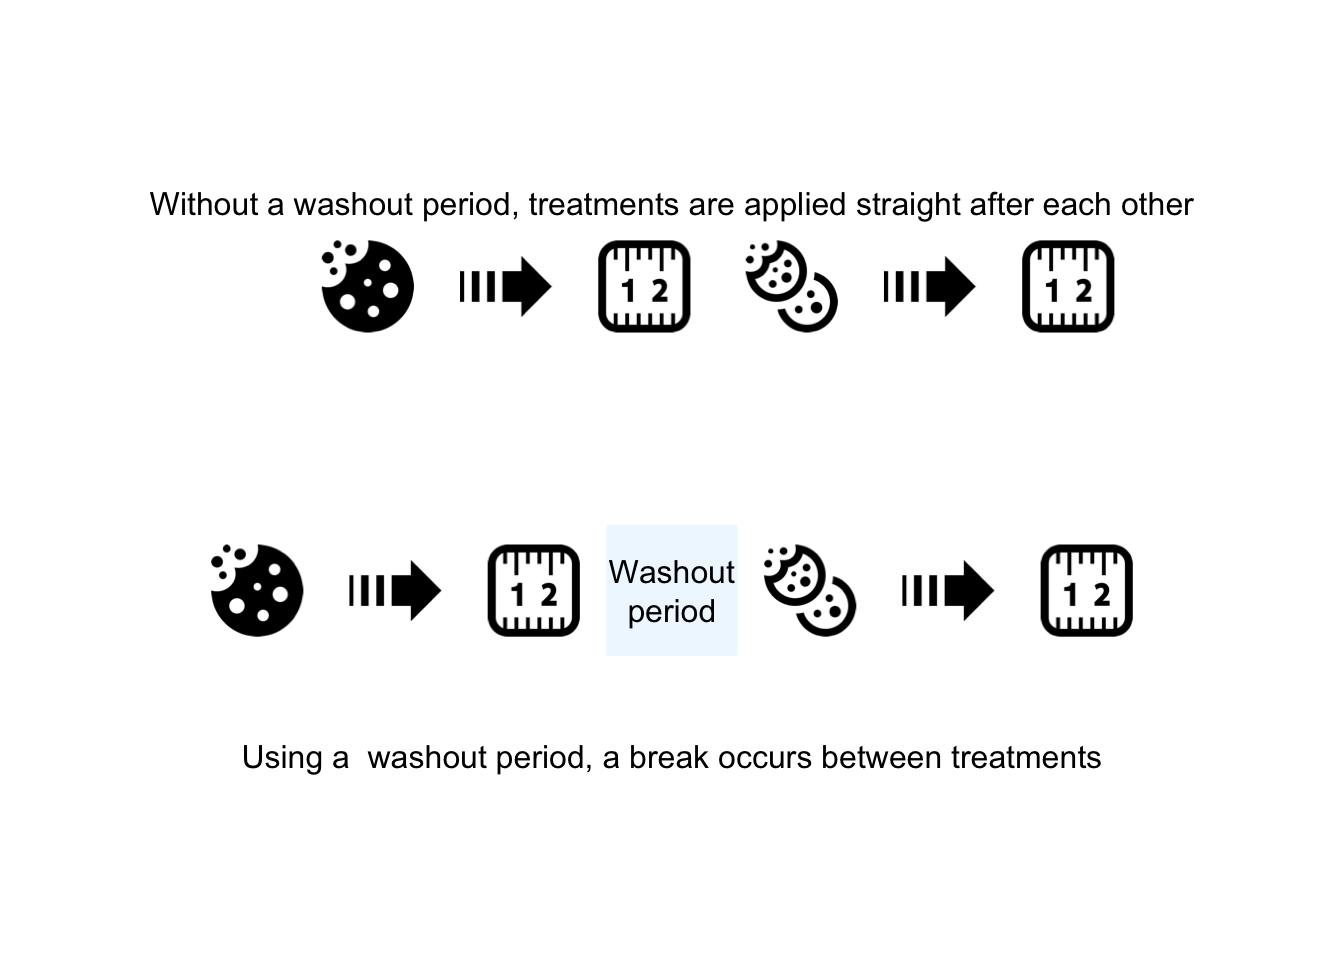 Using a 'washout' period to minimize the carry-over effect